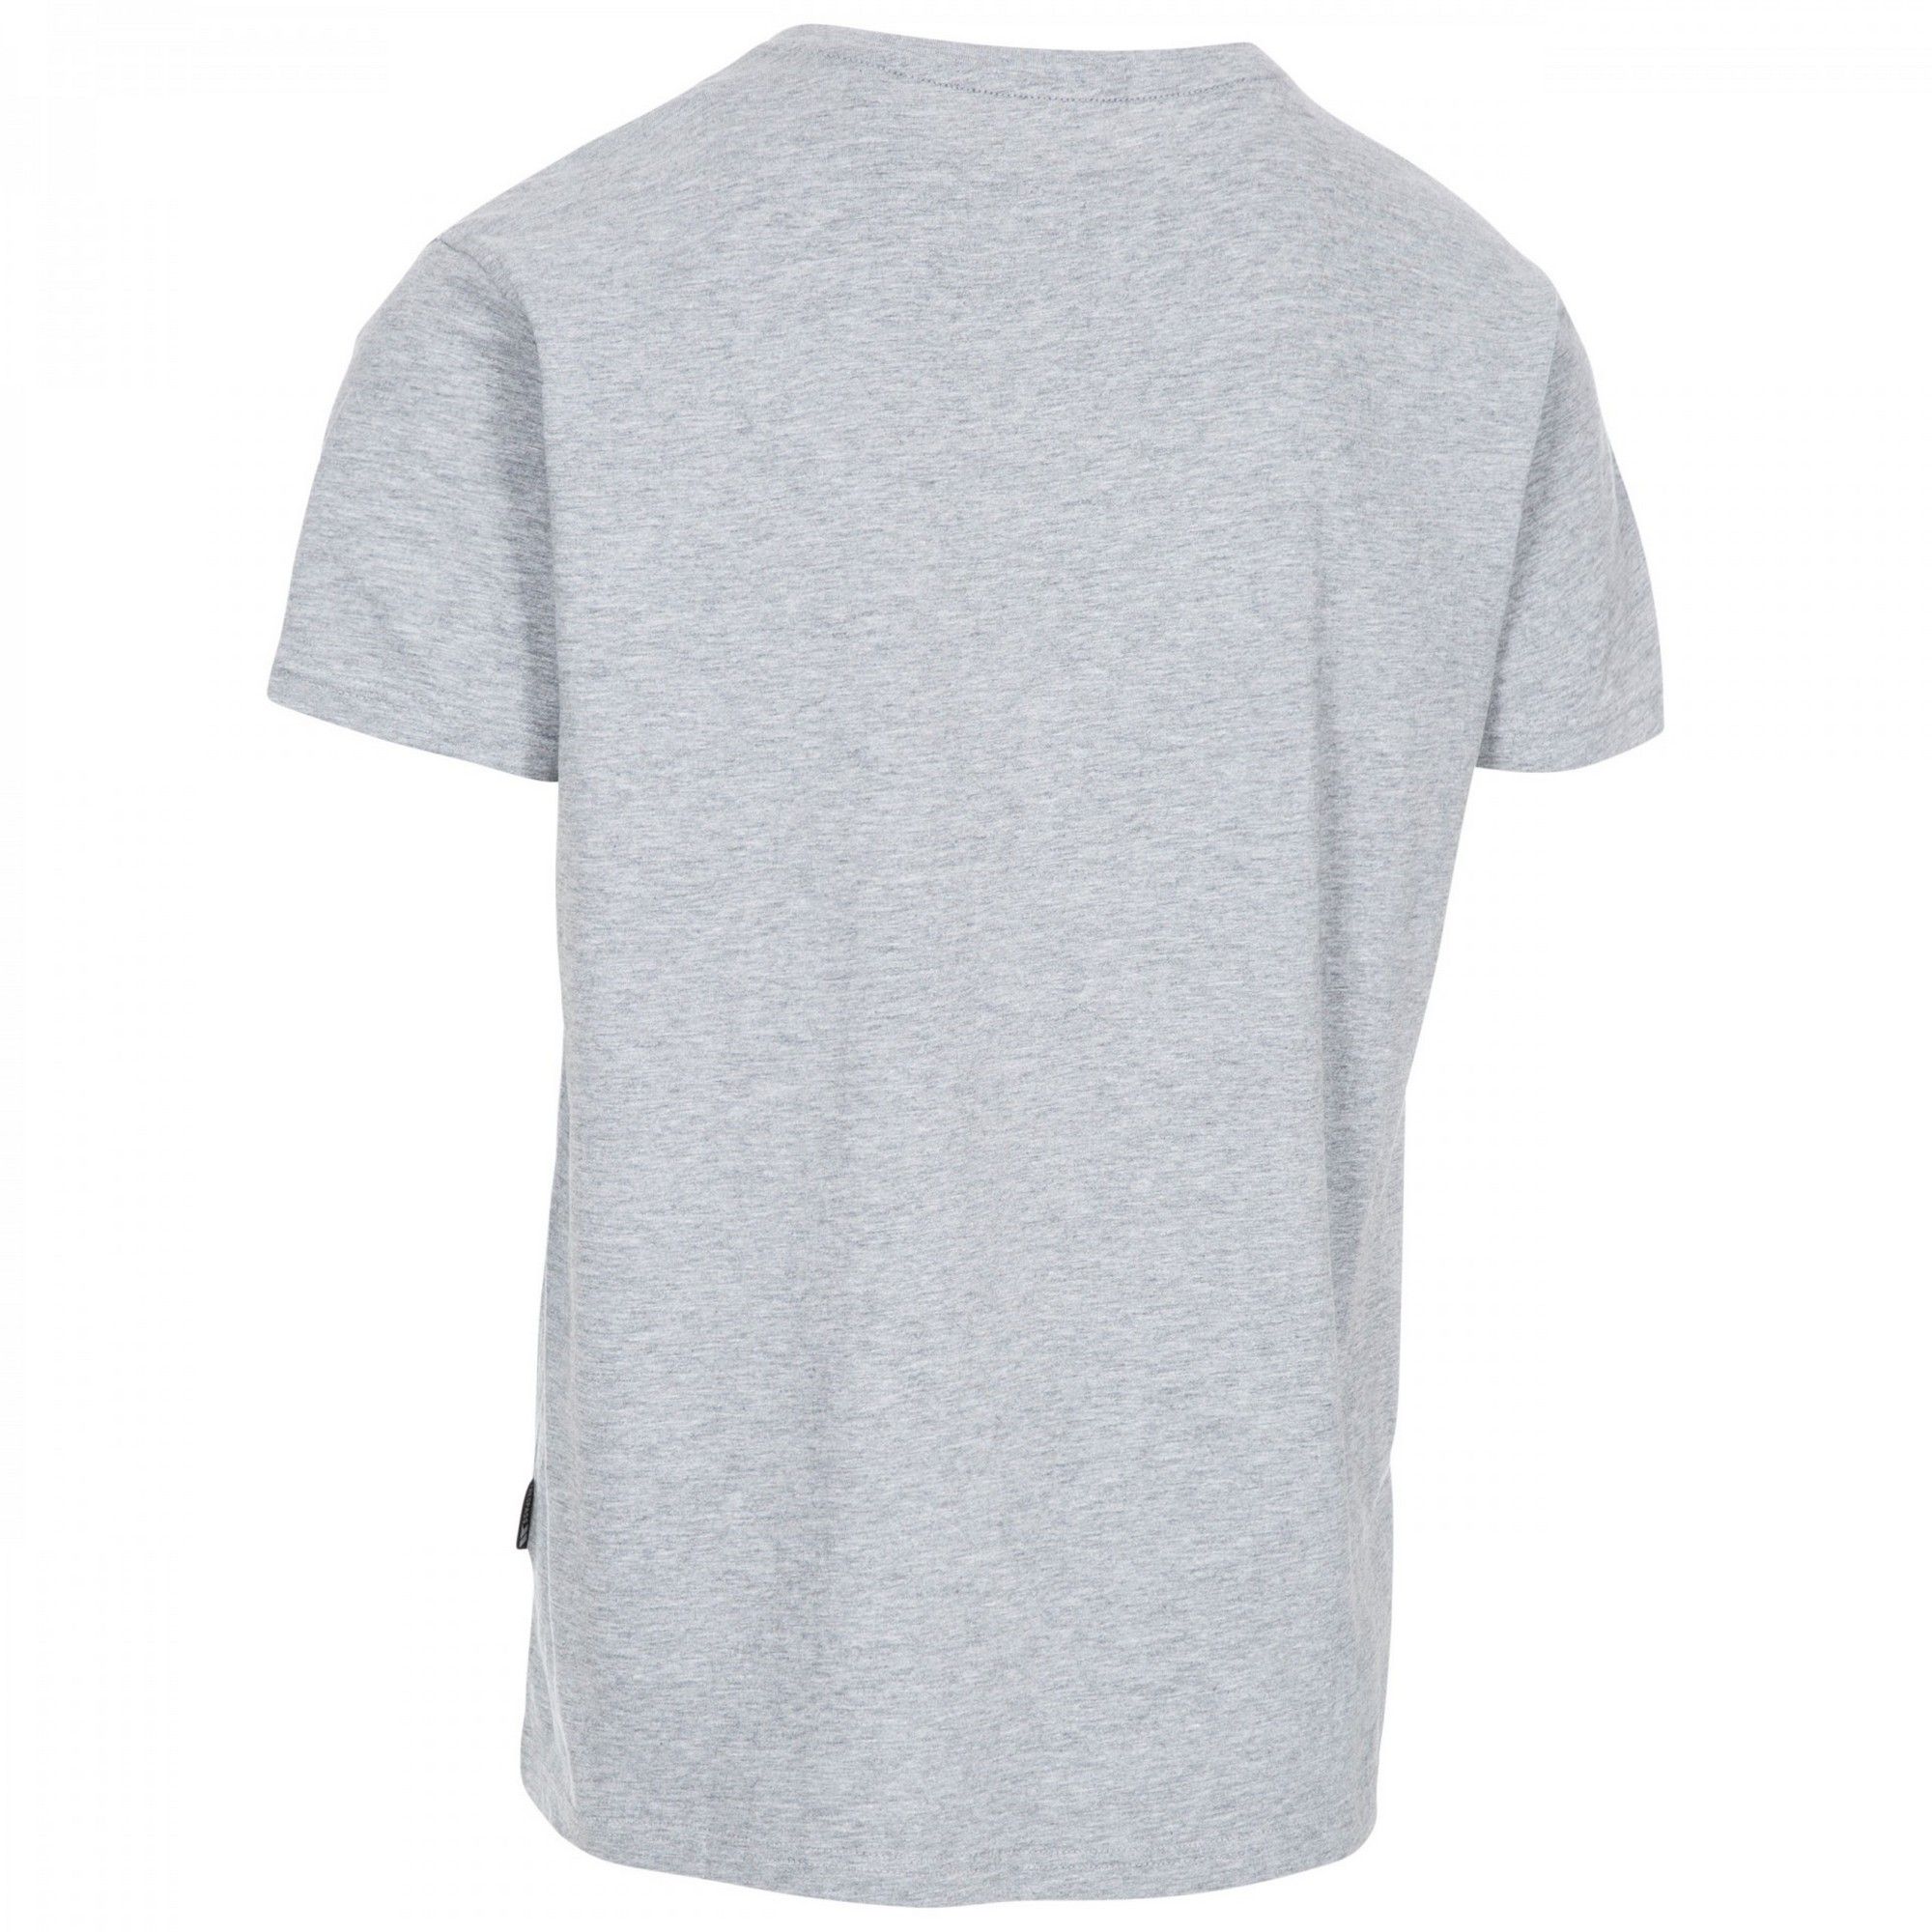 Fabric: 60% cotton, 40% polyester. Classic crew neck, short-sleeved tee made with wicking material and quick Dry fabric to ensure you are kept fresh all day.